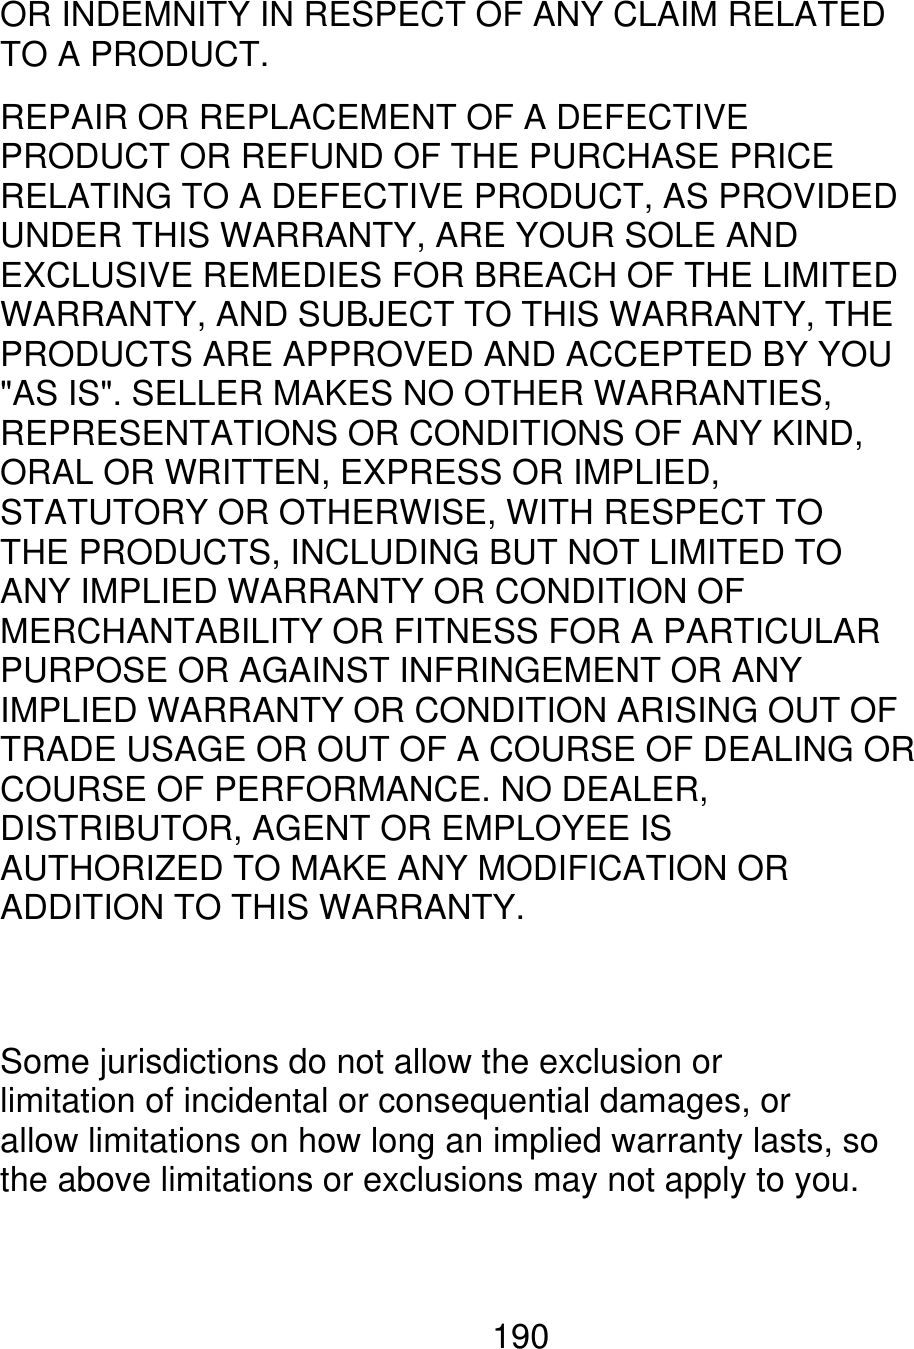 OR INDEMNITY IN RESPECT OF ANY CLAIM RELATED TO A PRODUCT. REPAIR OR REPLACEMENT OF A DEFECTIVE PRODUCT OR REFUND OF THE PURCHASE PRICE RELATING TO A DEFECTIVE PRODUCT, AS PROVIDED UNDER THIS WARRANTY, ARE YOUR SOLE AND EXCLUSIVE REMEDIES FOR BREACH OF THE LIMITED WARRANTY, AND SUBJECT TO THIS WARRANTY, THE PRODUCTS ARE APPROVED AND ACCEPTED BY YOU &quot;AS IS&quot;. SELLER MAKES NO OTHER WARRANTIES, REPRESENTATIONS OR CONDITIONS OF ANY KIND, ORAL OR WRITTEN, EXPRESS OR IMPLIED, STATUTORY OR OTHERWISE, WITH RESPECT TO THE PRODUCTS, INCLUDING BUT NOT LIMITED TO ANY IMPLIED WARRANTY OR CONDITION OF MERCHANTABILITY OR FITNESS FOR A PARTICULAR PURPOSE OR AGAINST INFRINGEMENT OR ANY IMPLIED WARRANTY OR CONDITION ARISING OUT OF TRADE USAGE OR OUT OF A COURSE OF DEALING OR COURSE OF PERFORMANCE. NO DEALER, DISTRIBUTOR, AGENT OR EMPLOYEE IS AUTHORIZED TO MAKE ANY MODIFICATION OR ADDITION TO THIS WARRANTY. Some jurisdictions do not allow the exclusion or limitation of incidental or consequential damages, or allow limitations on how long an implied warranty lasts, so the above limitations or exclusions may not apply to you. 190 